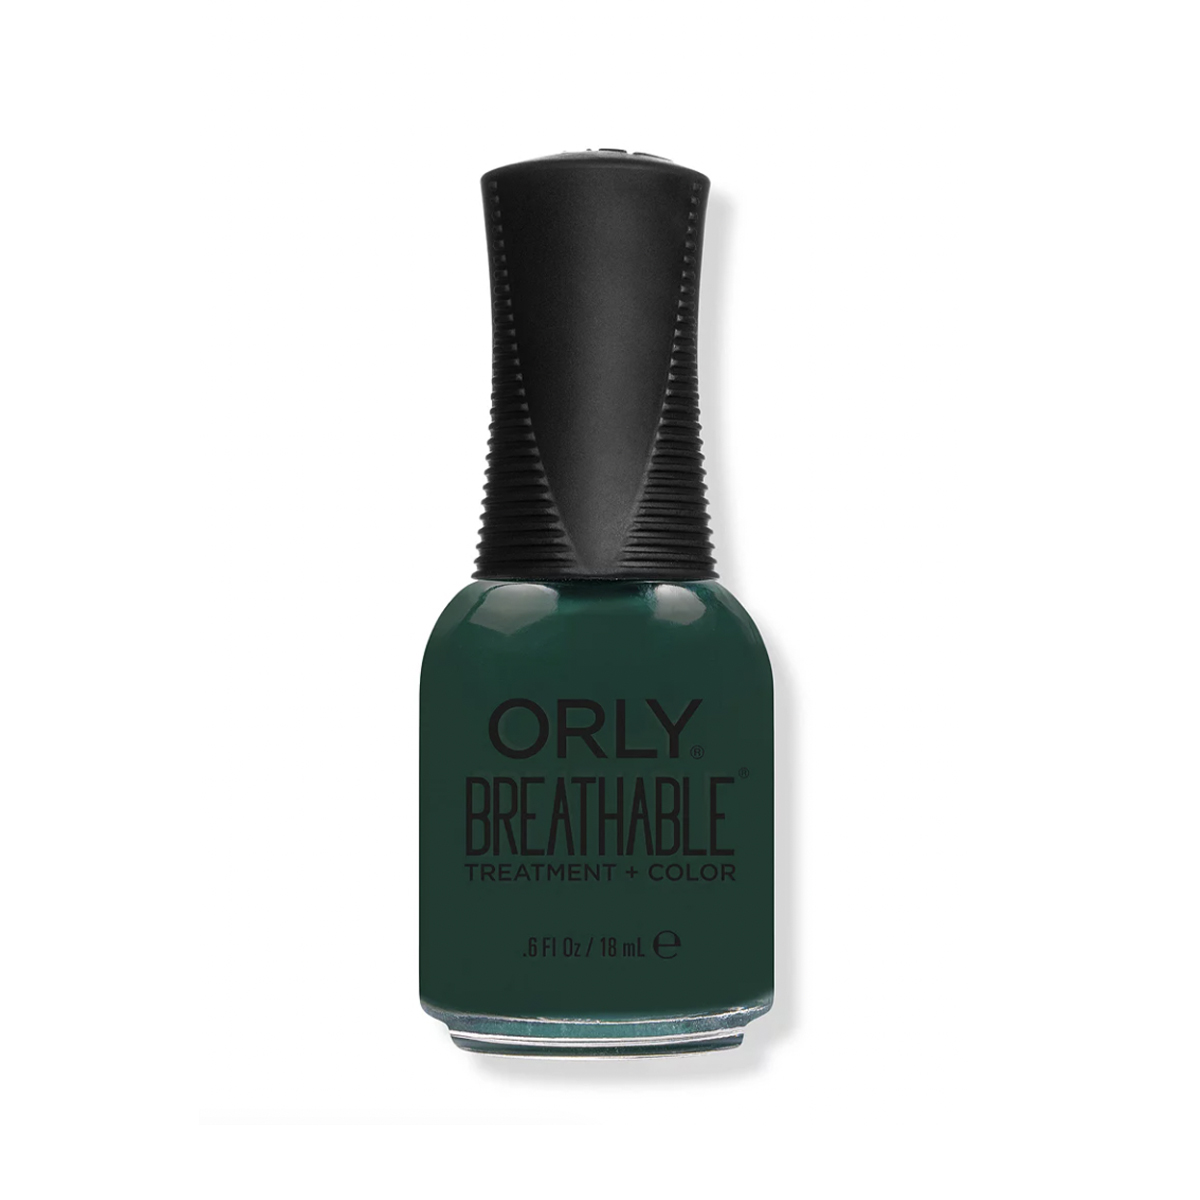 Orly Breathable Treatment + Color in Pine-ing for You